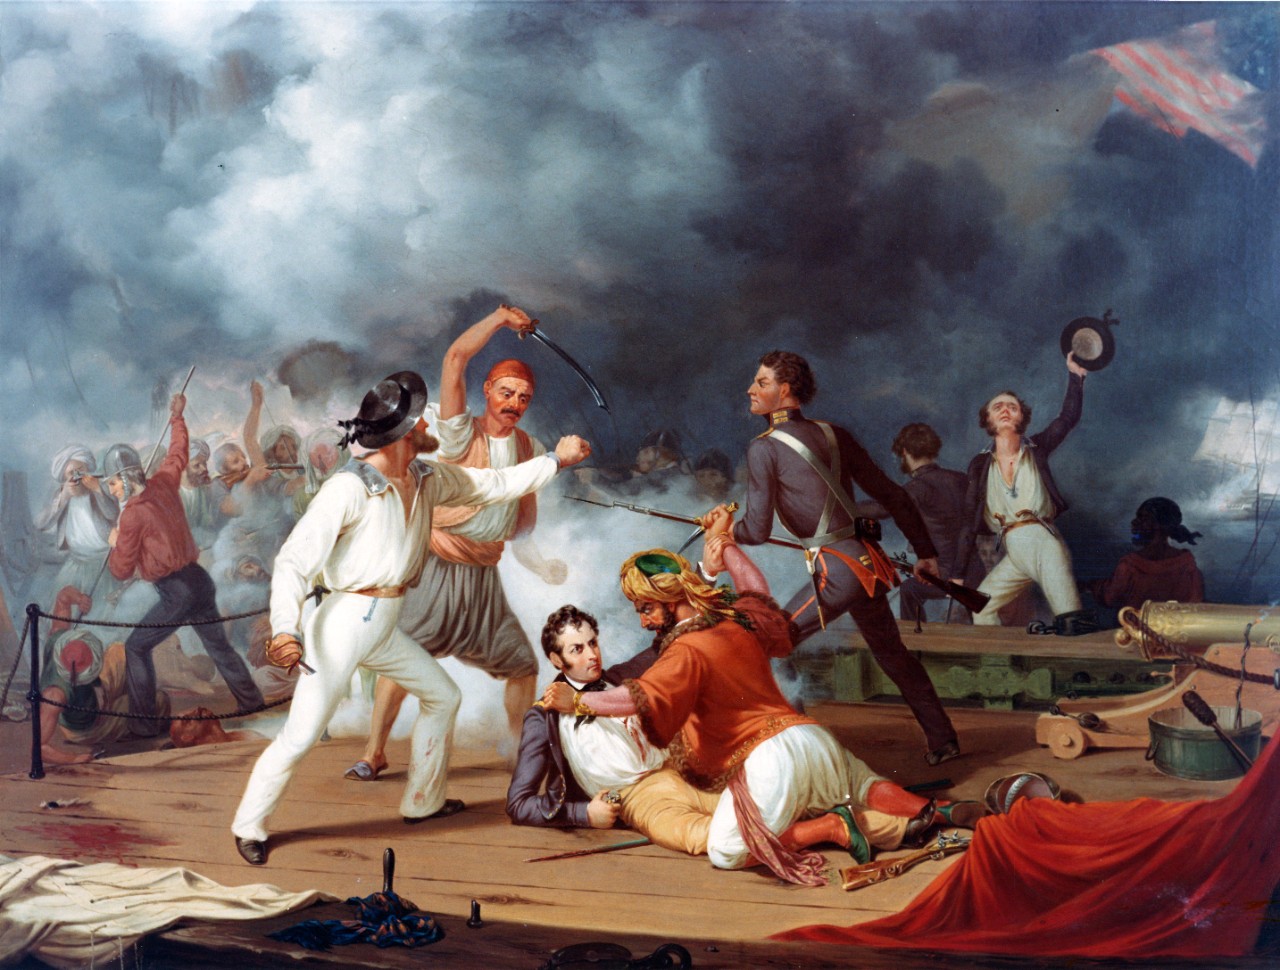 "Stephen Decatur's Conflict with the Algerine at Tripoli"